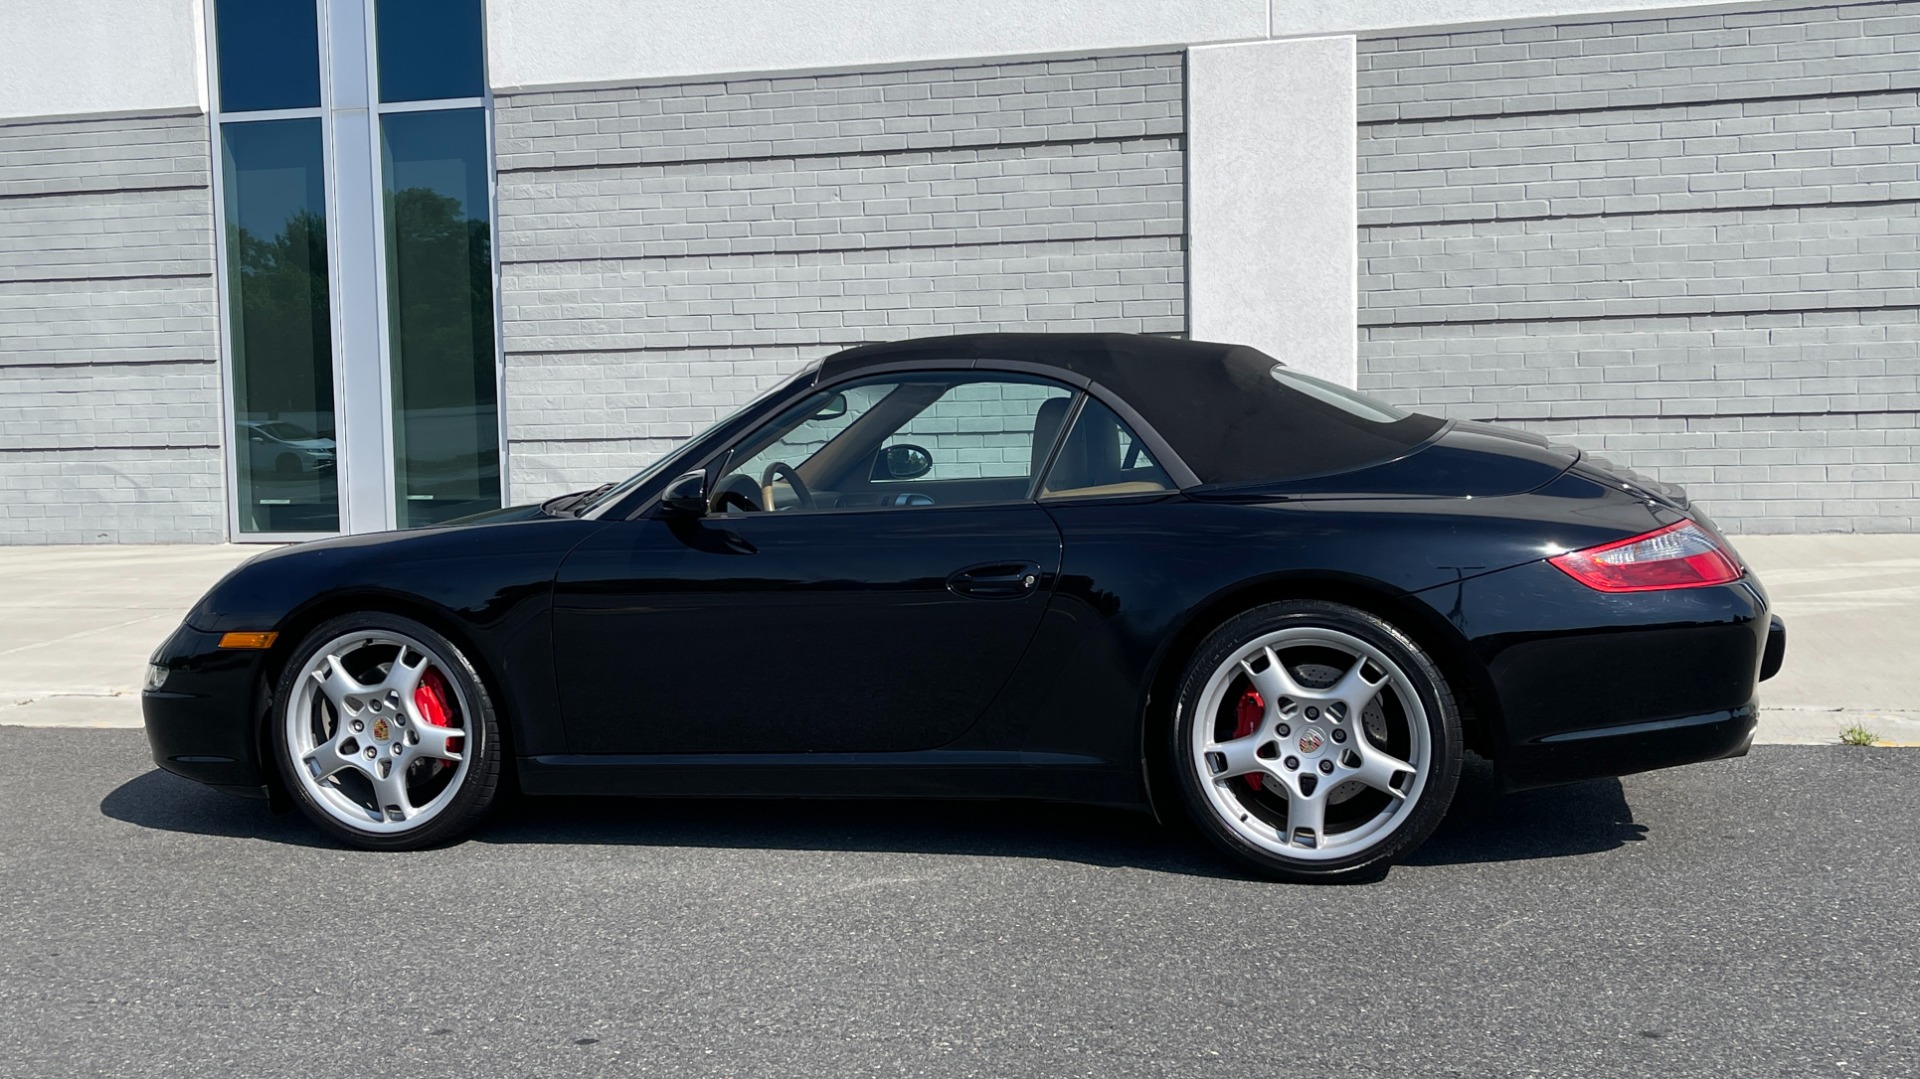 Used 2006 Porsche 911 CARRERA S CABRIOLET / BOSE / CD CHANGER / PWR SEAT PKG / HTD STS for sale $60,999 at Formula Imports in Charlotte NC 28227 13